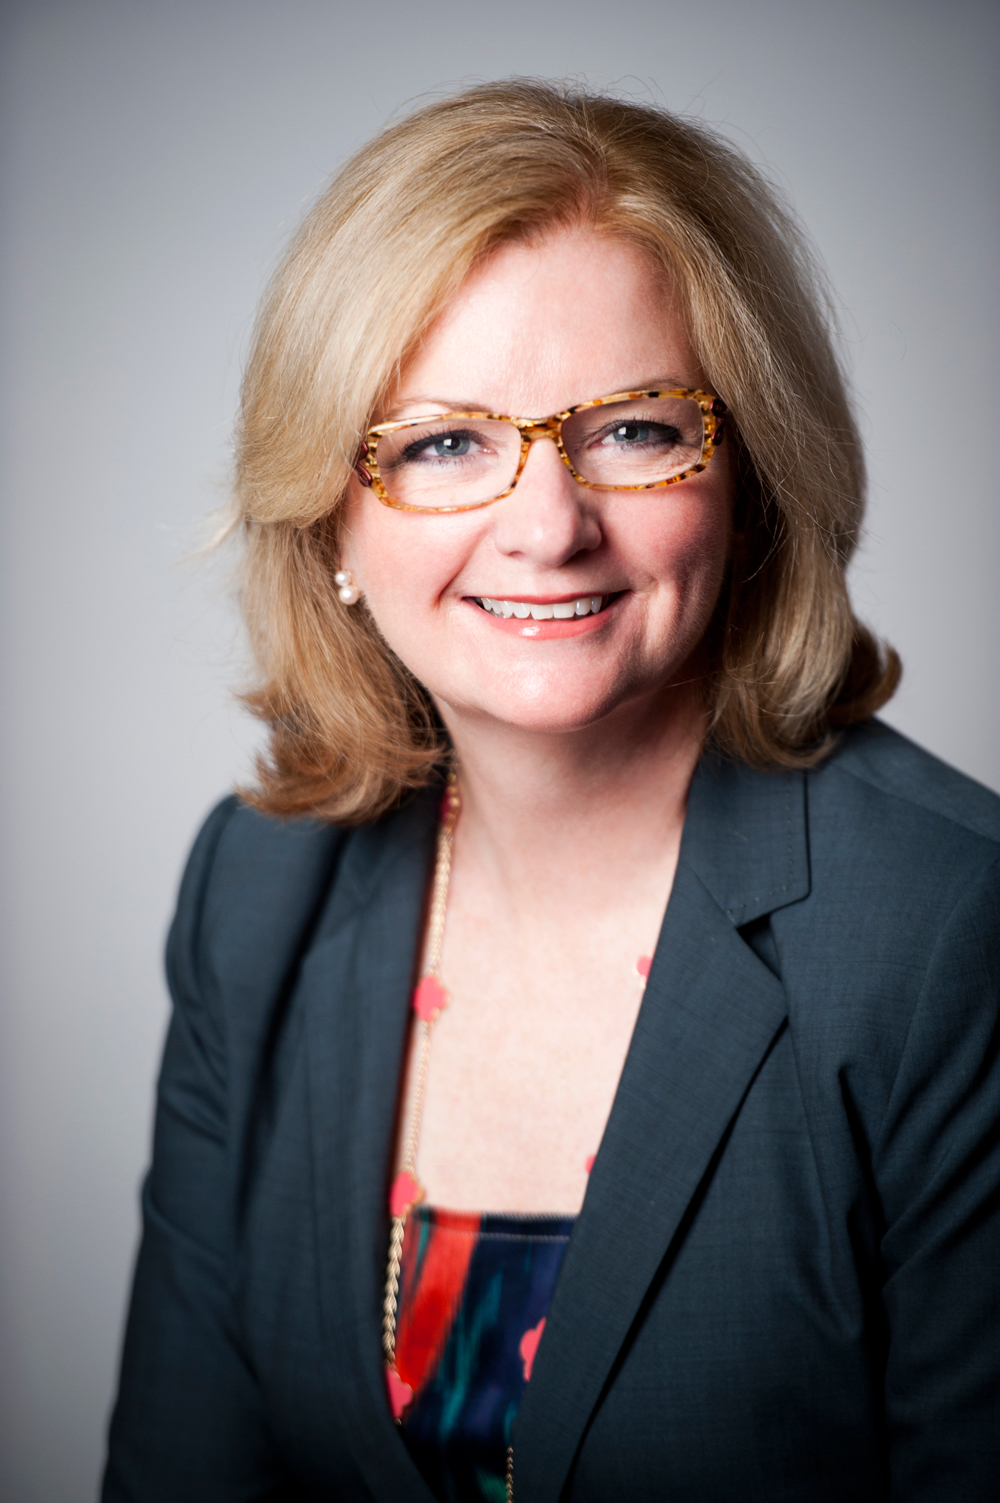 Sharon C. Kiely, MD, senior vice president, medical affairs, and chief medical officer at Stamford Health